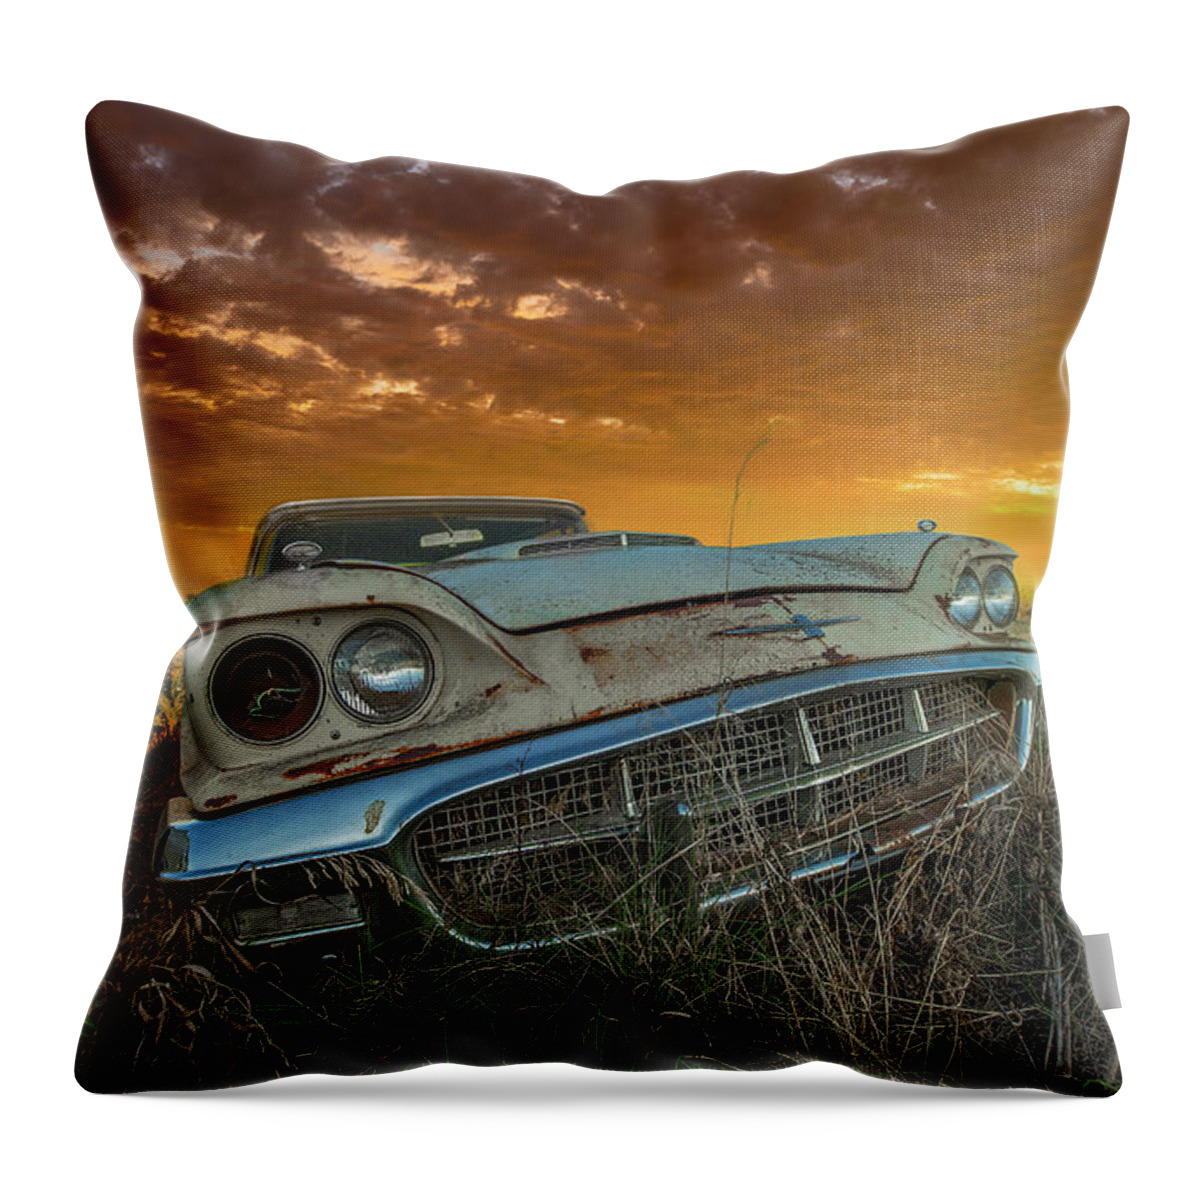 Abandoned Throw Pillow featuring the photograph Here To Stay by Aaron J Groen